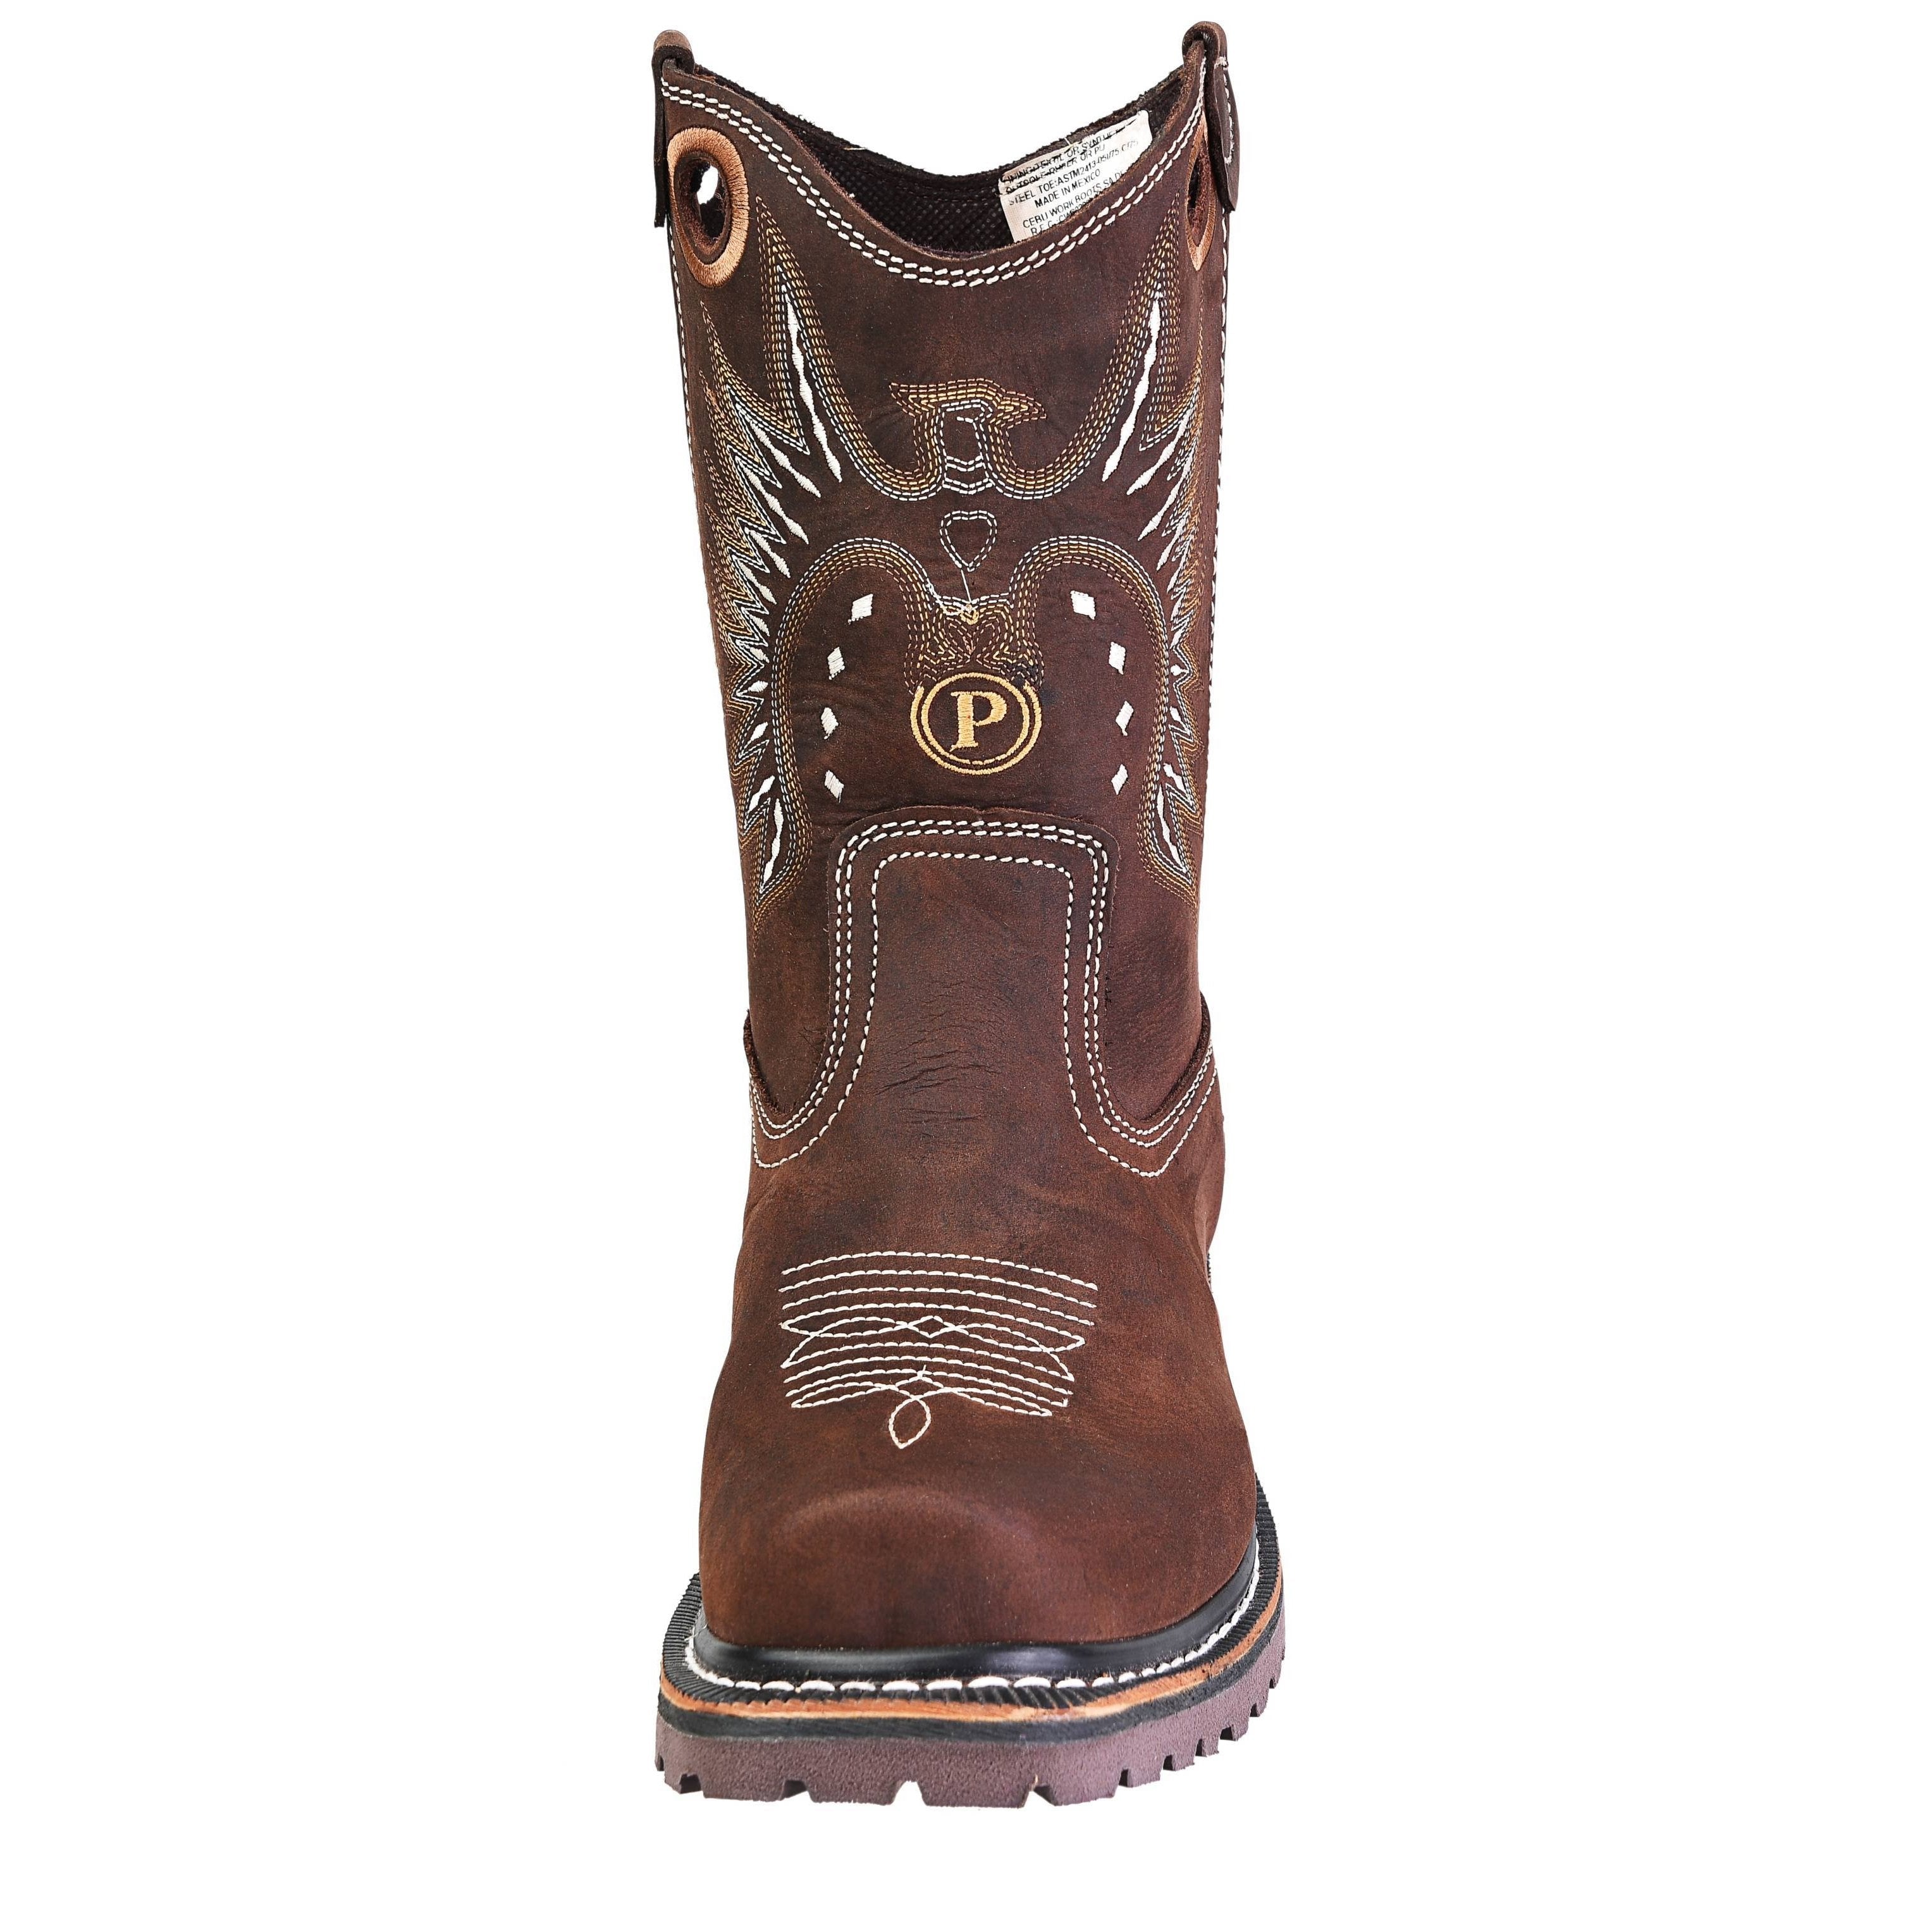 Men's Work Boots - Composite Toe - Brown Work Boots - Pradera - Pull On Work Boots - Chocolate Wellington Work Boots